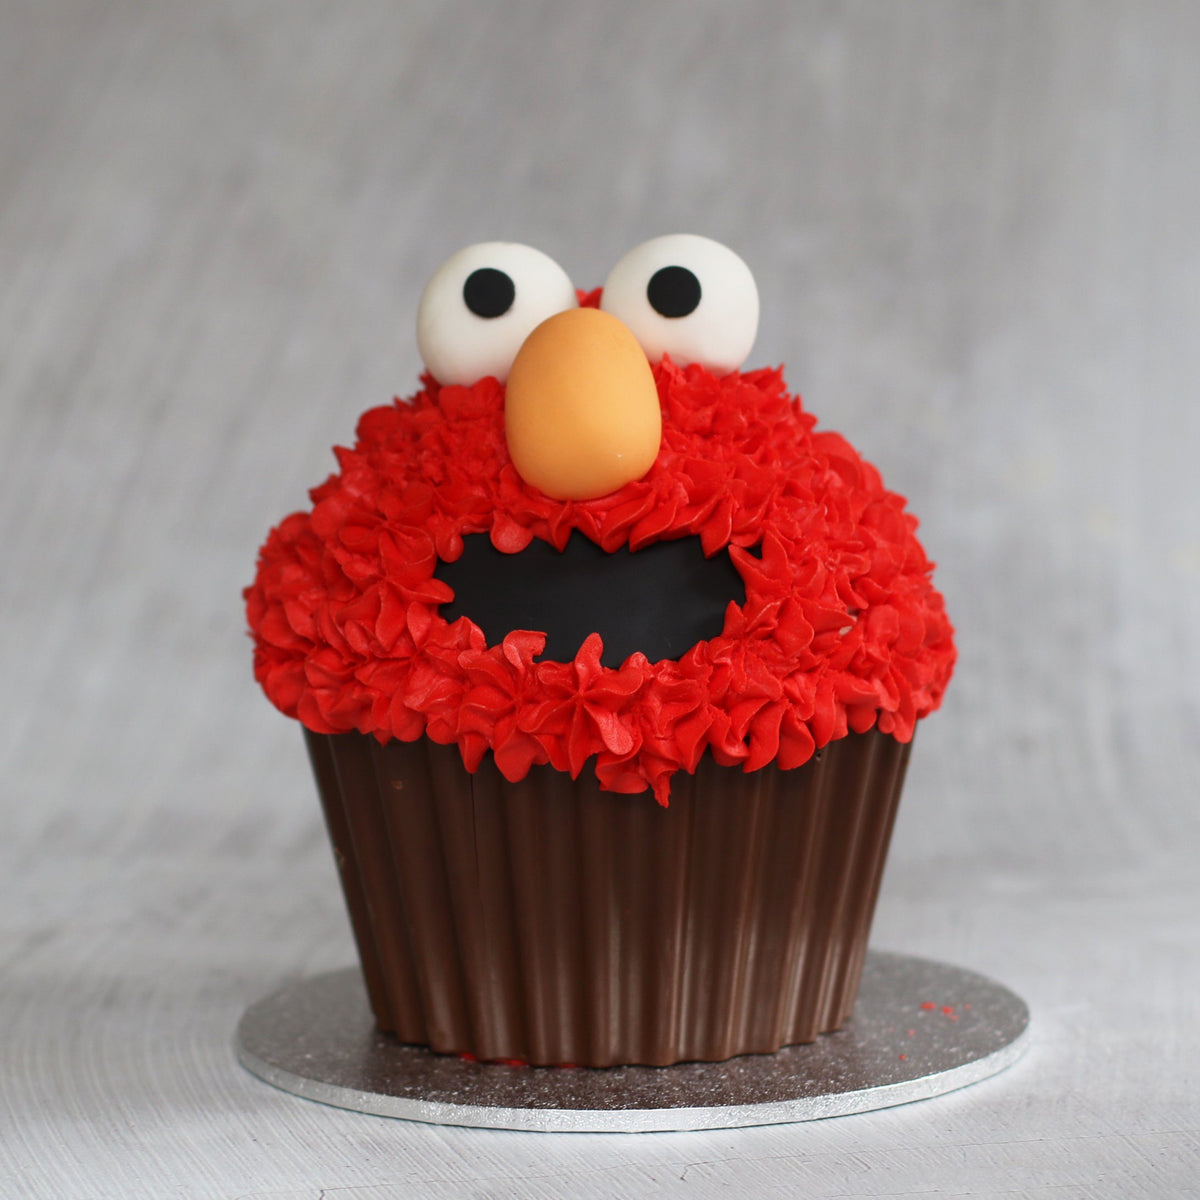 Elmo Giant Cupcake Special Occasion The Cupcake Queens 